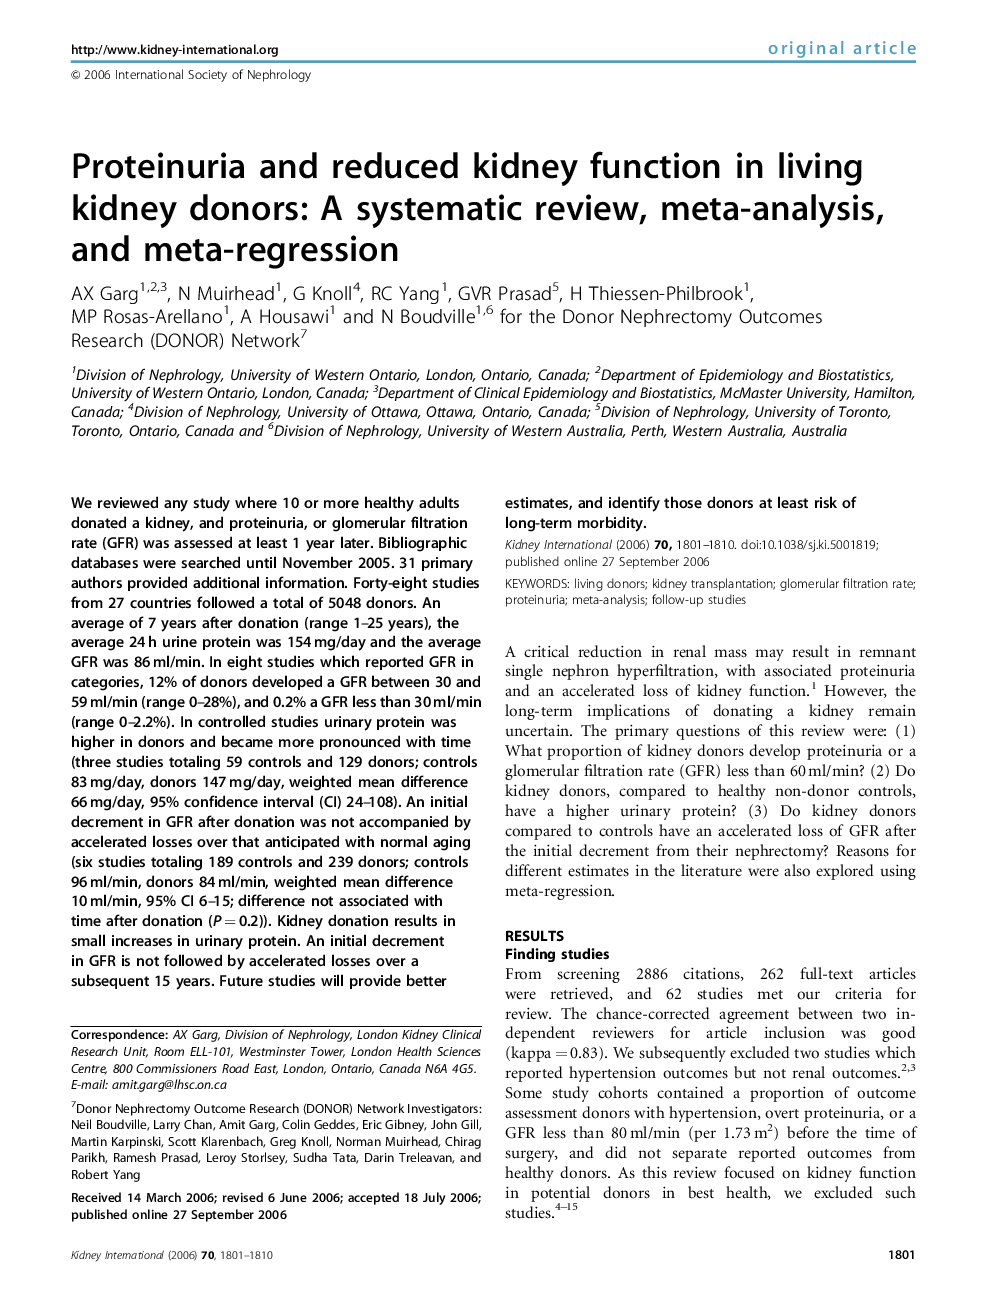 Proteinuria and reduced kidney function in living kidney donors: A systematic review, meta-analysis, and meta-regression